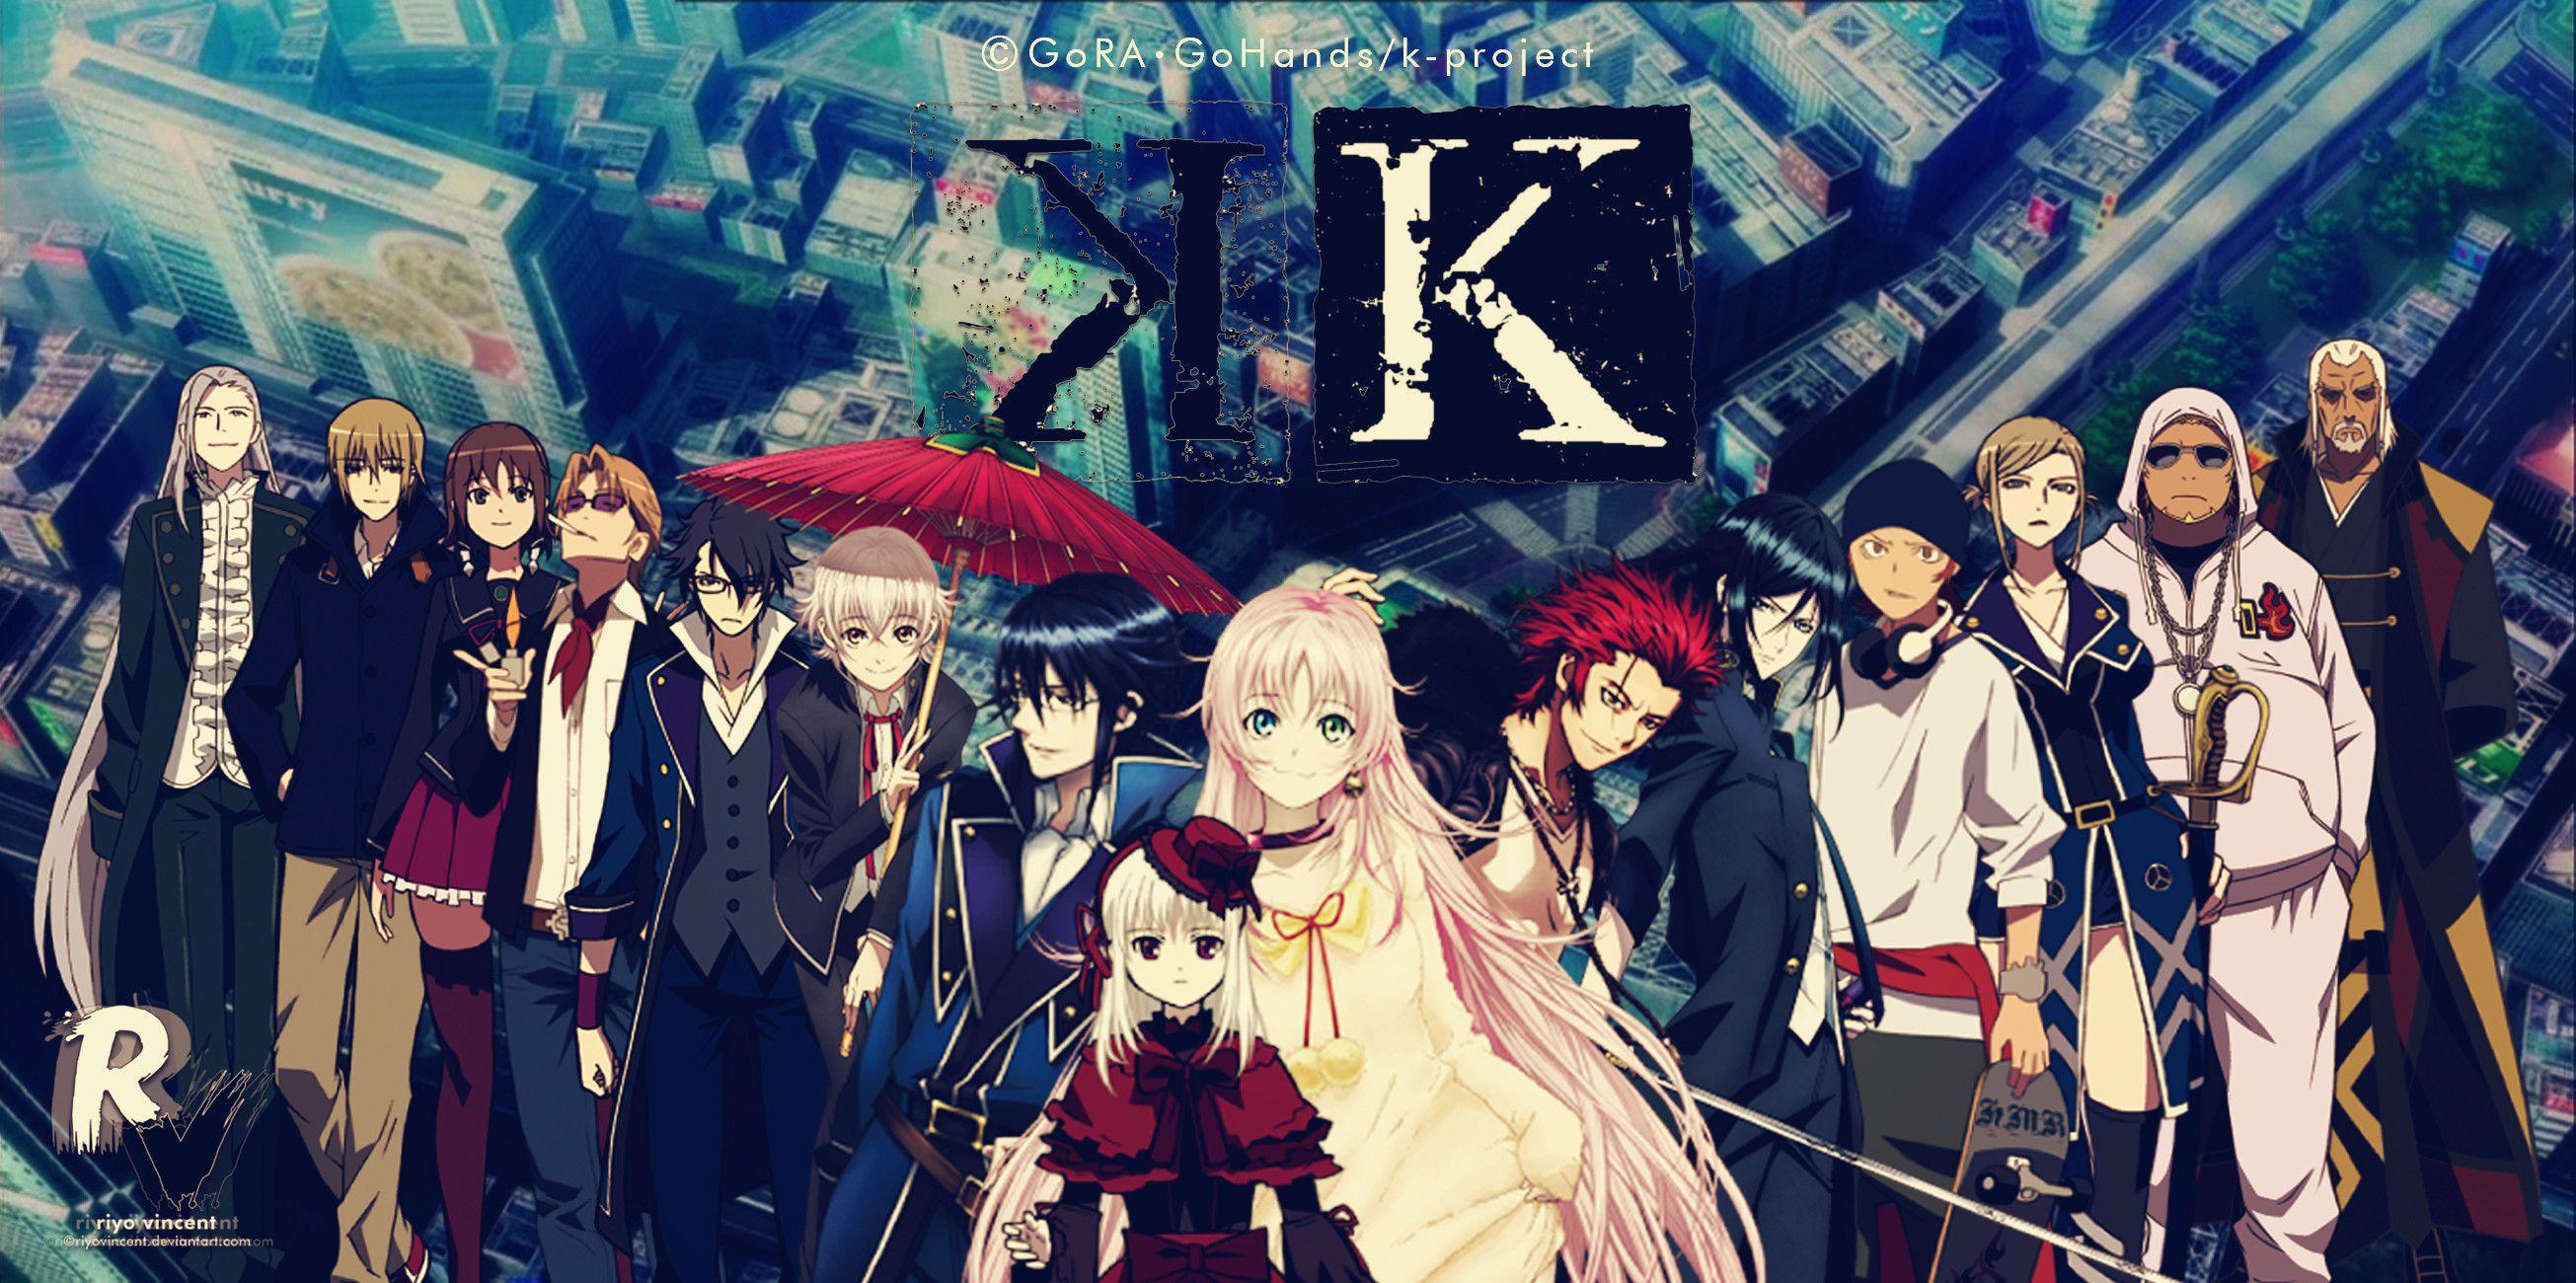 K-Anime  Online Anime HD APK 1.1.9 for Android – Download K-Anime